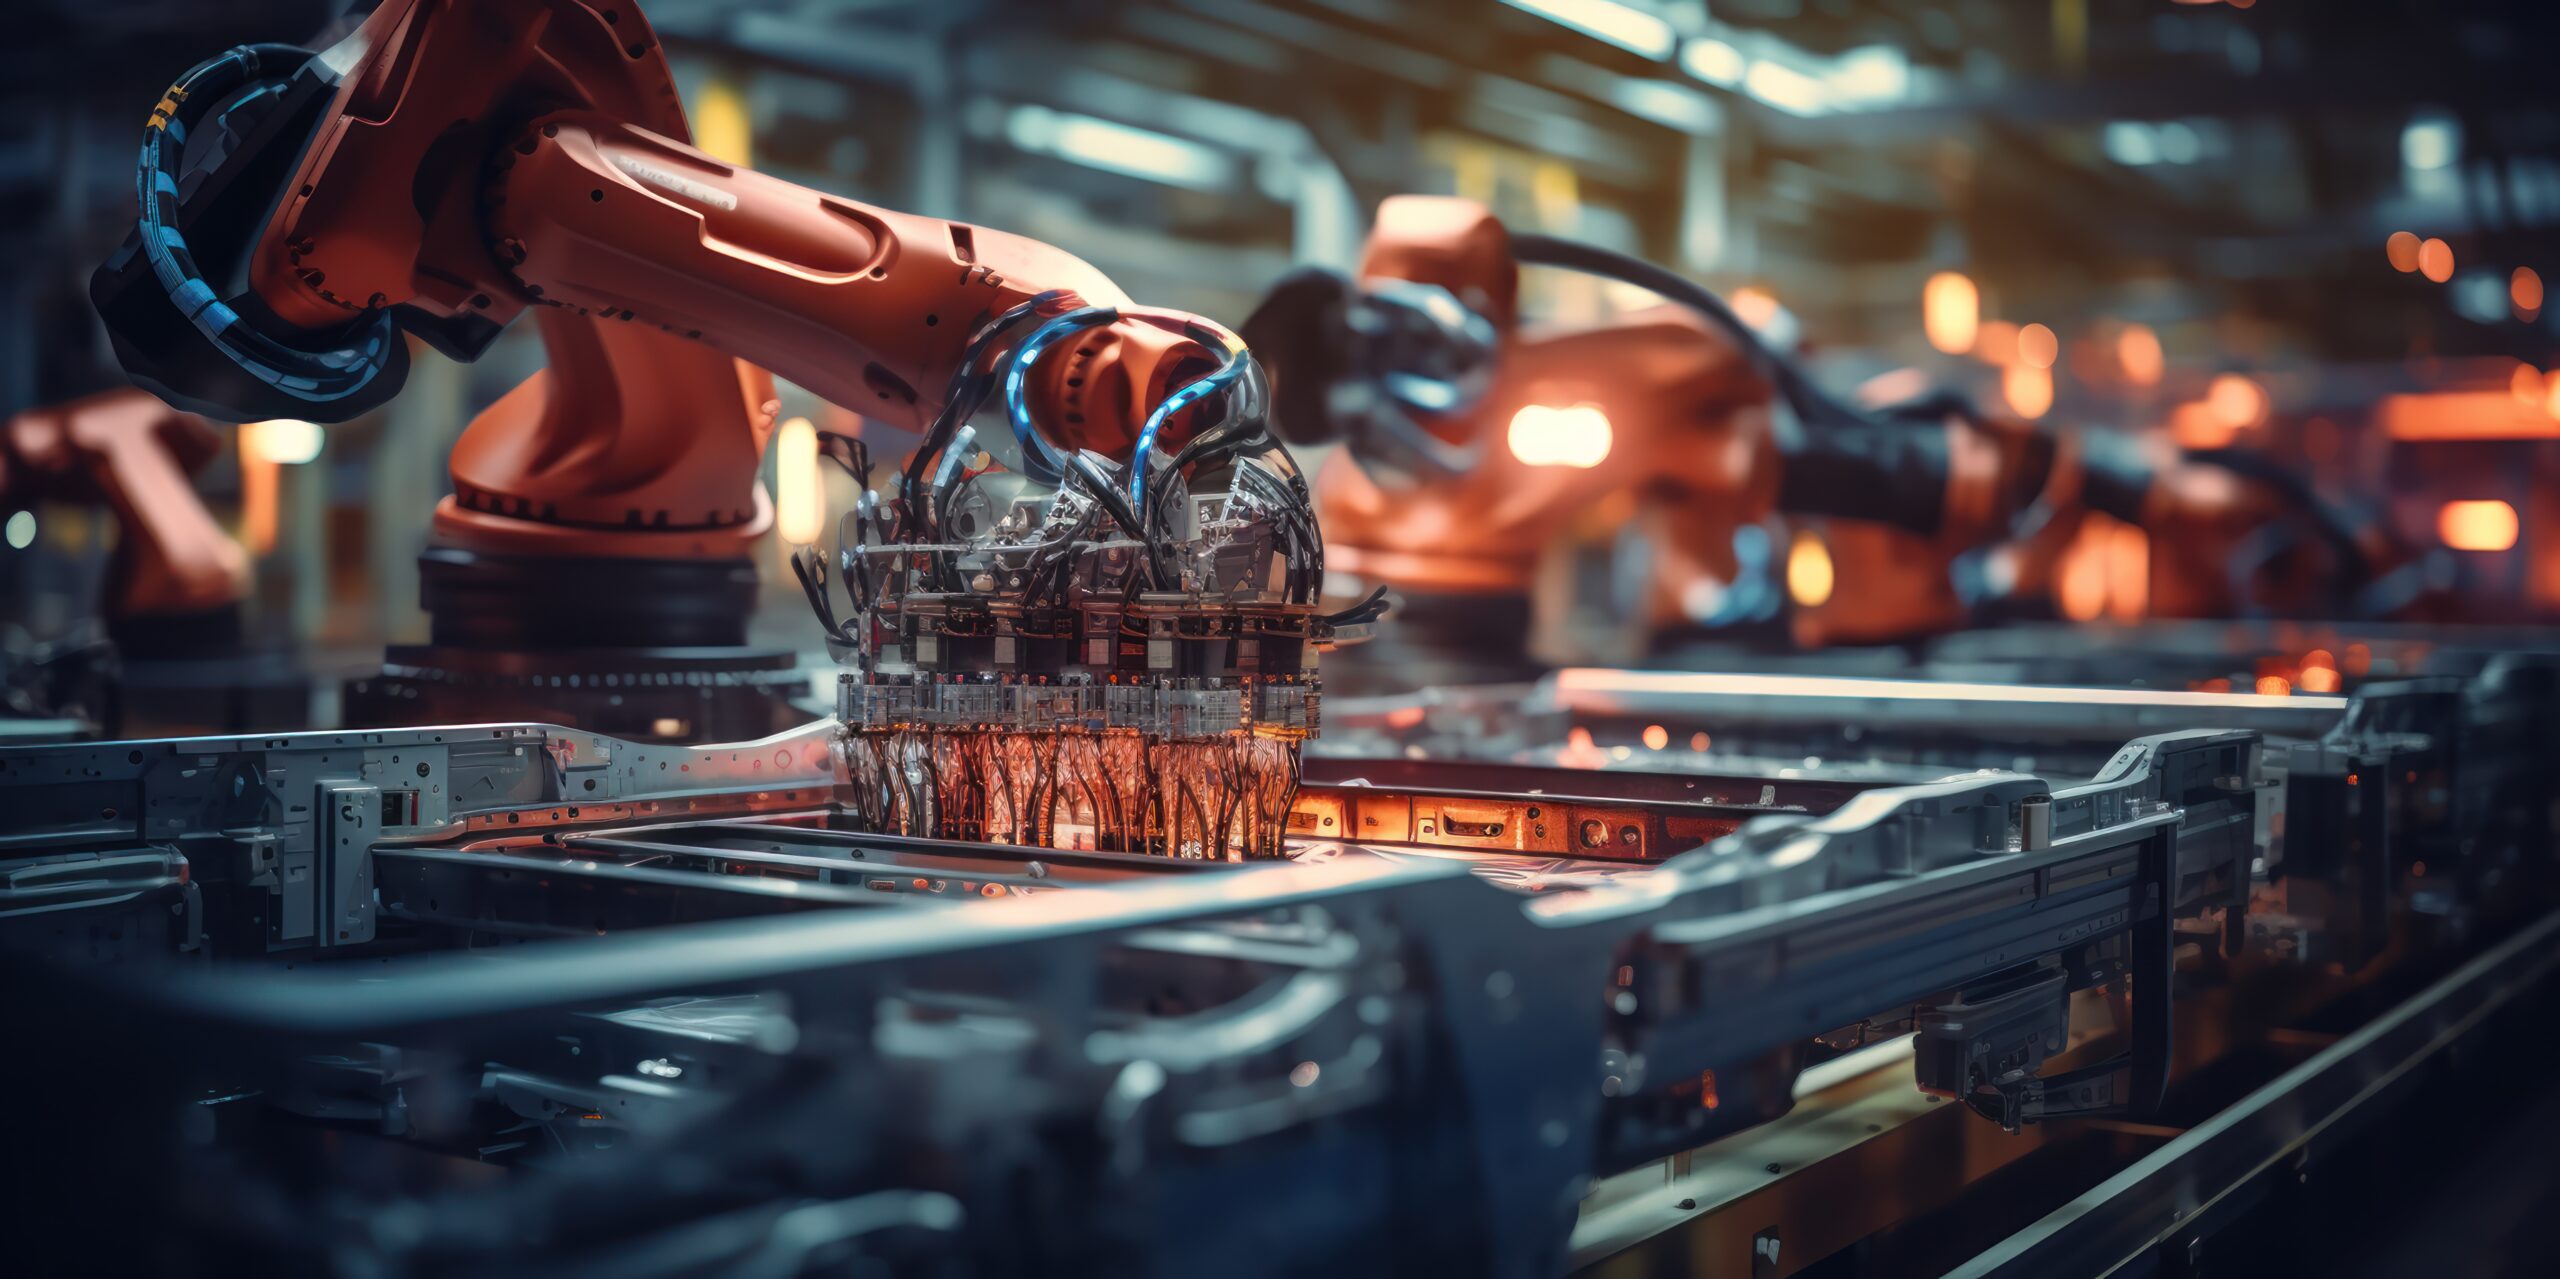 Why Industry 4.0 is manufacturing’s path increased productivity, reduced costs, and improved quality